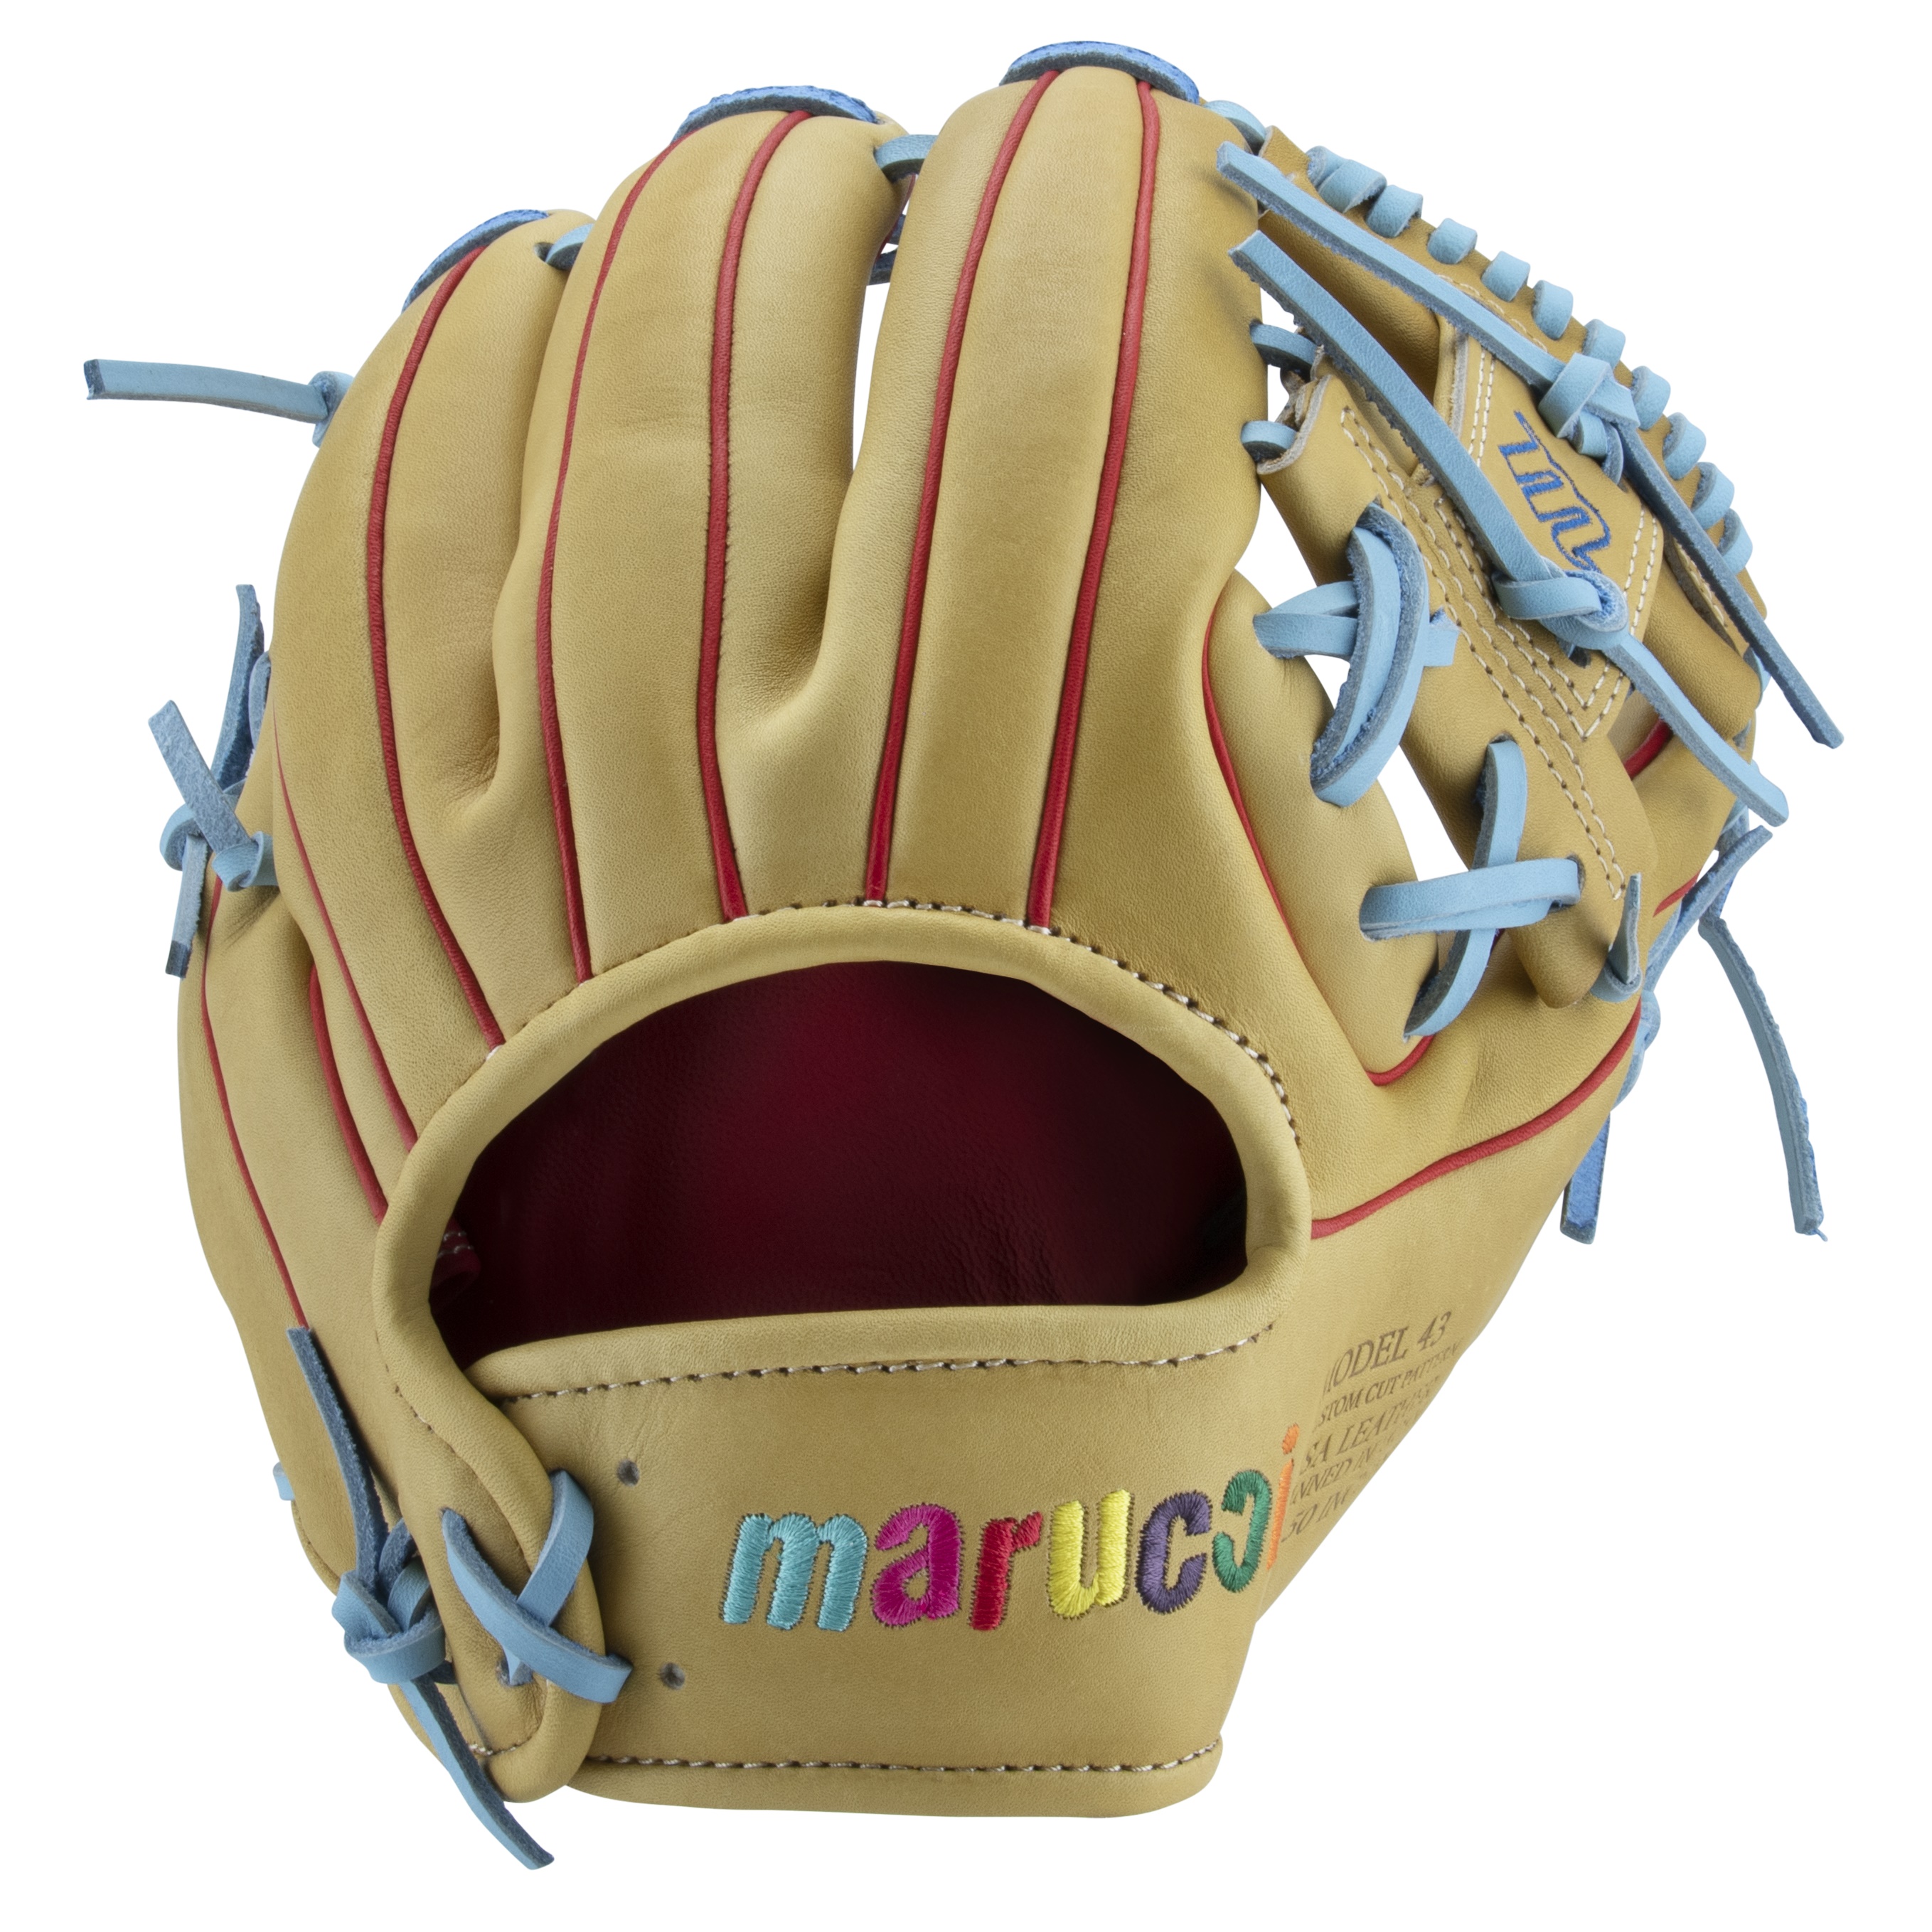 marucci-nightshift-baseball-glove-11-5-coloring-book-right-hand-throw MFGNTSHFT-0105-RightHandThrow      CAPITOL M TYPE 43A2 11.5” I-WEB • Shape